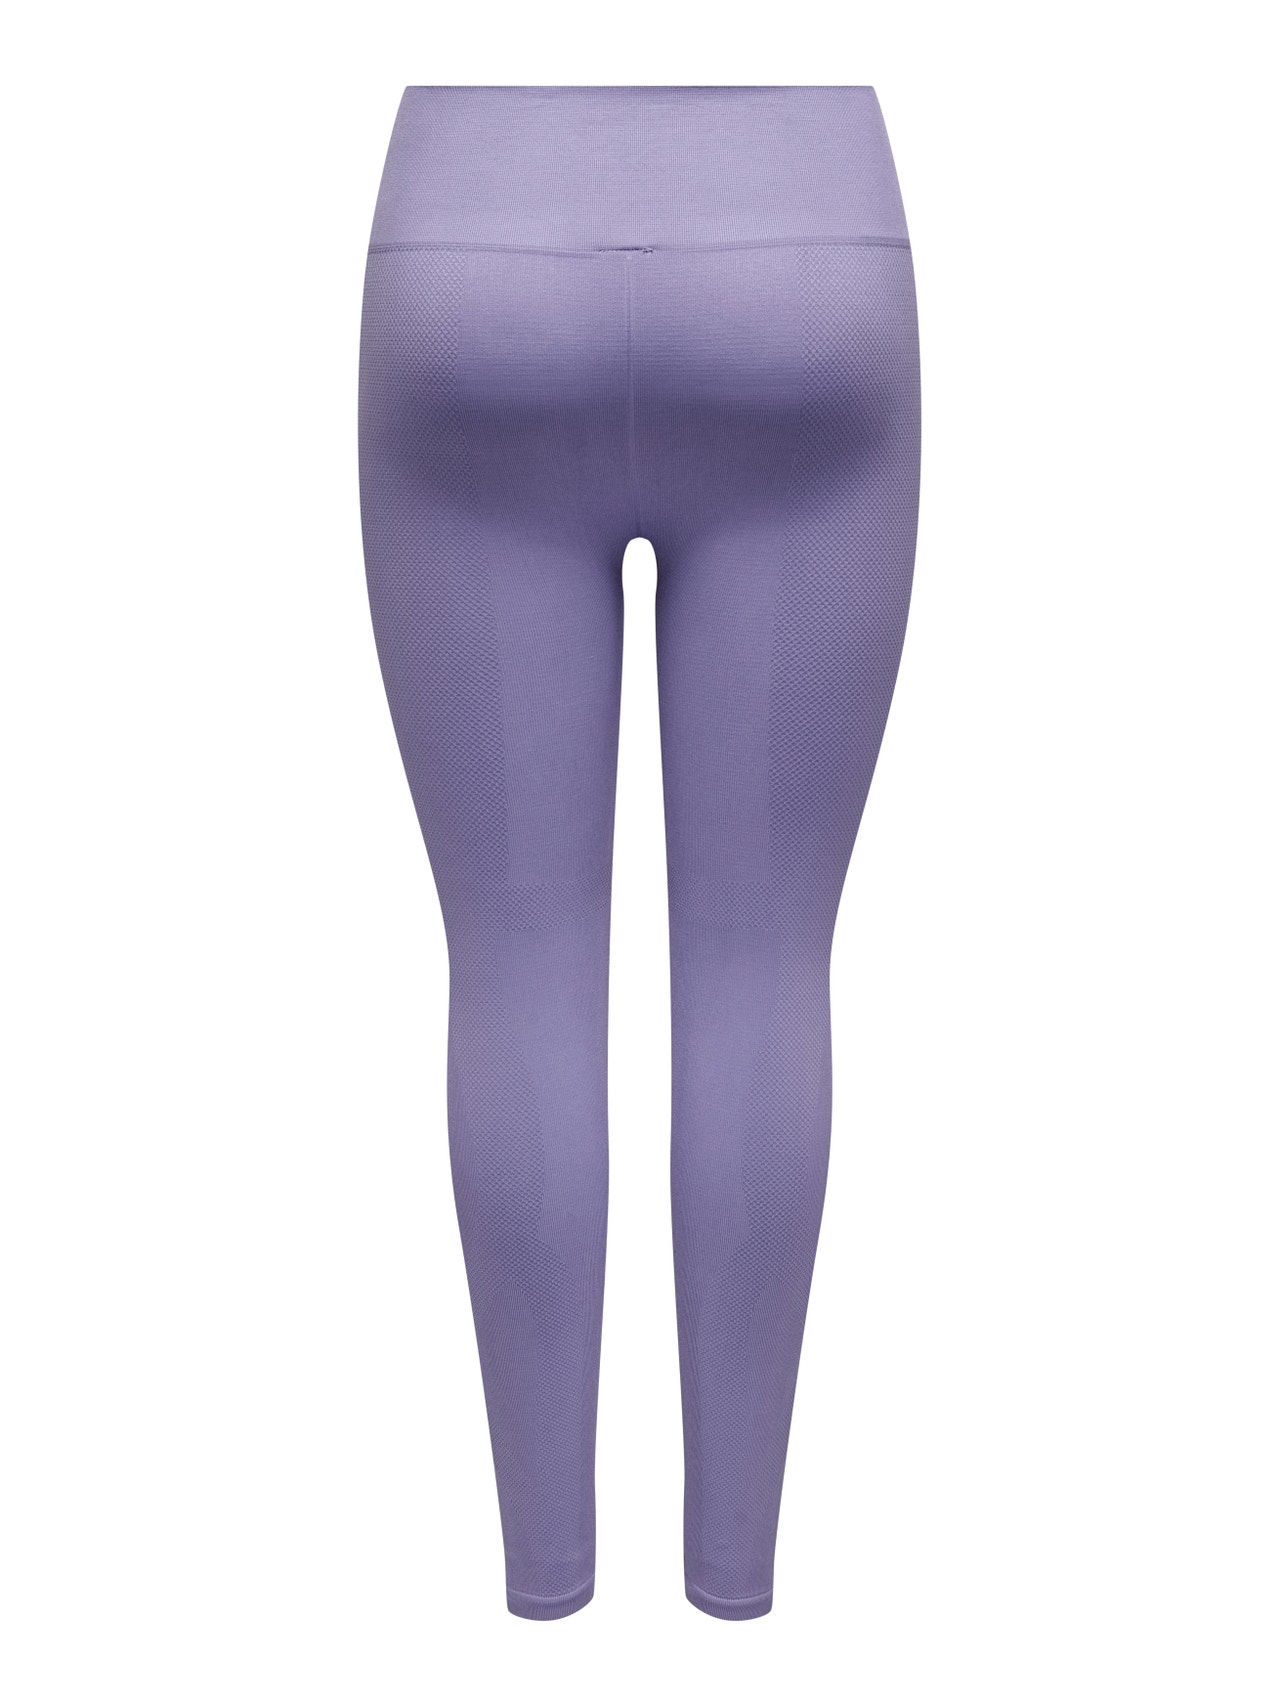 Slim Fit High waist Leggings with 20% discount!